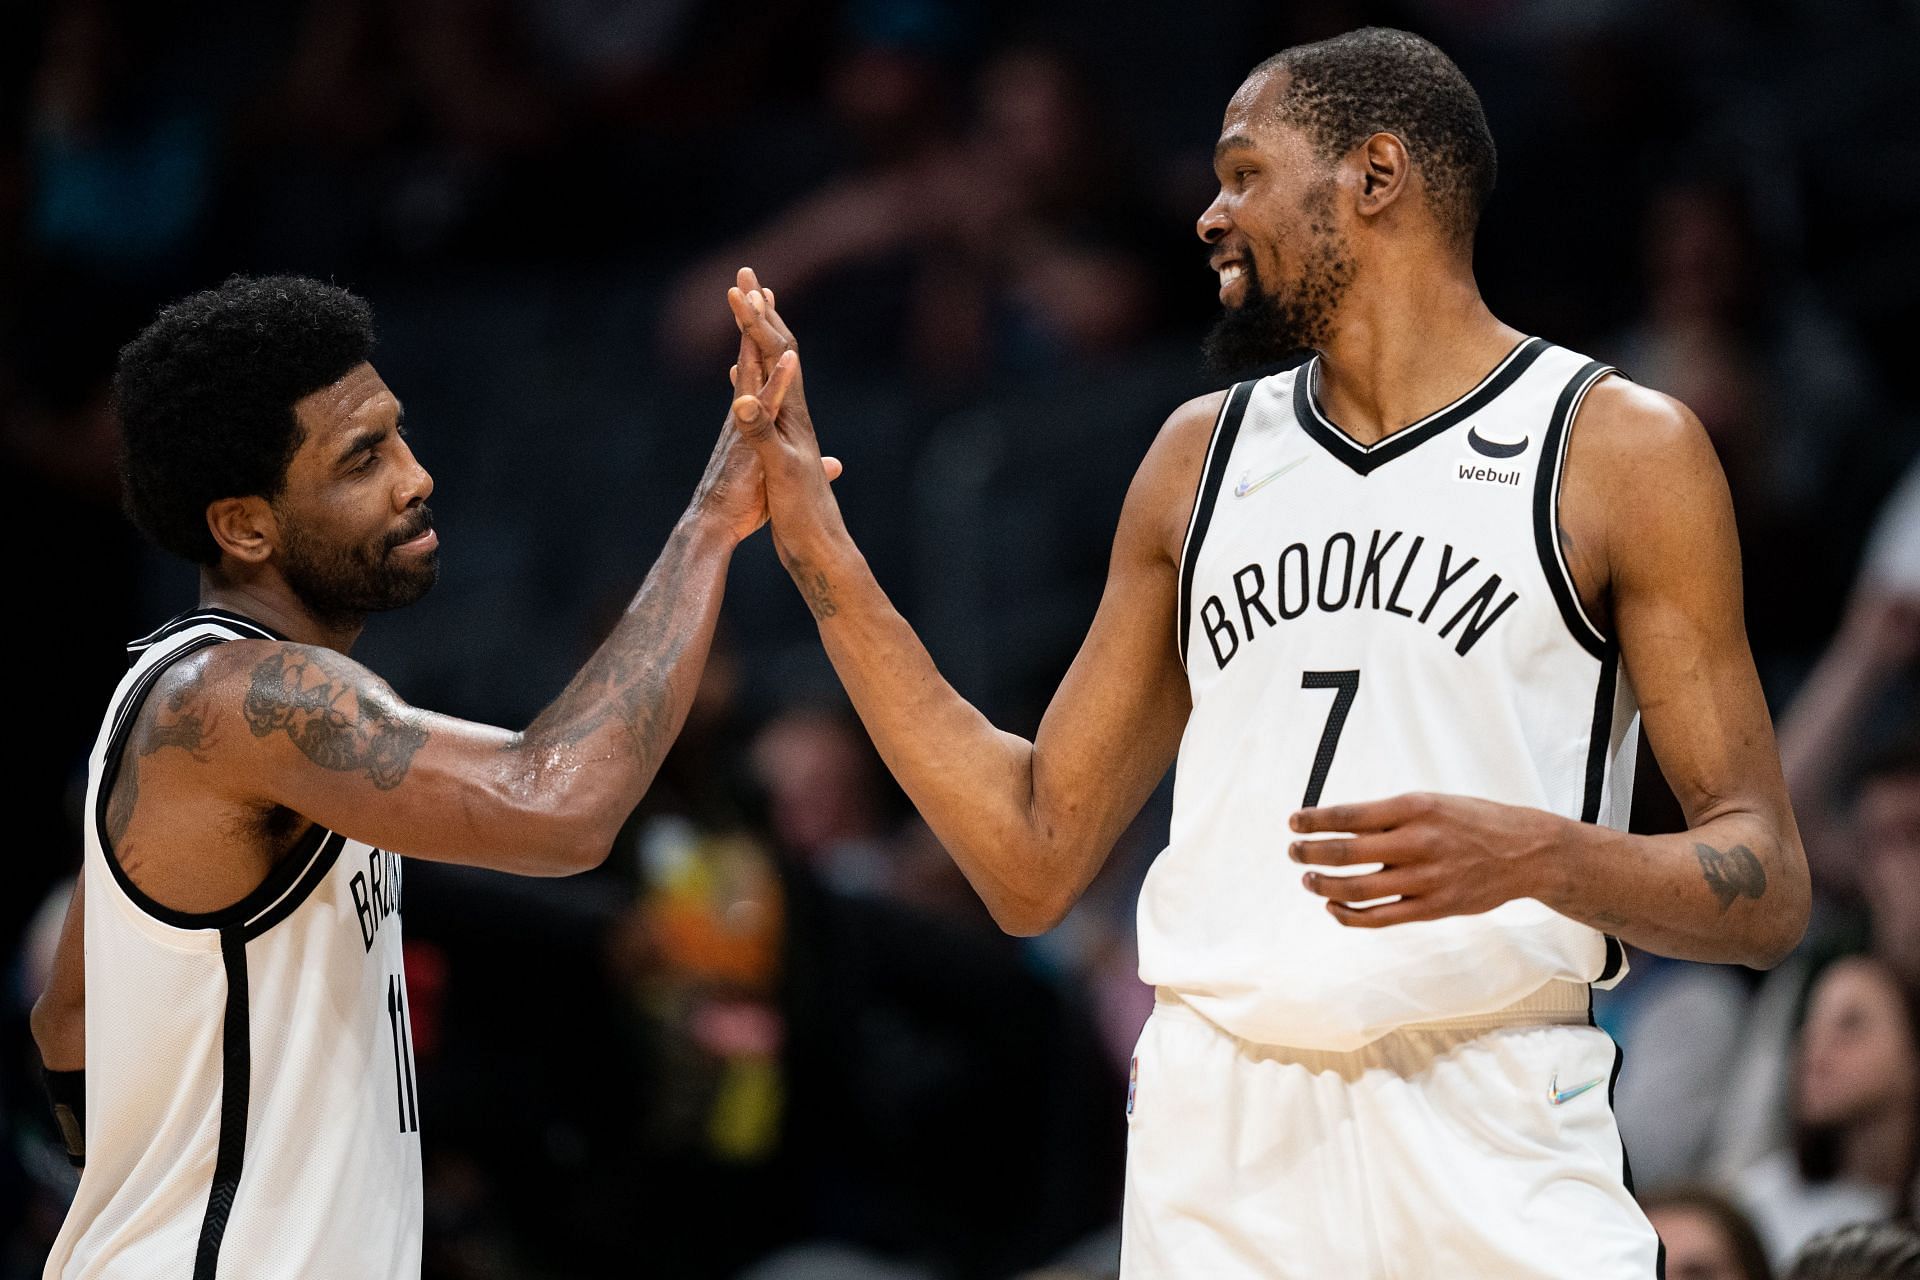 Kyrie Irving, left, and Kyrie Irving may stay in Brooklyn. (Image via Getty Images)